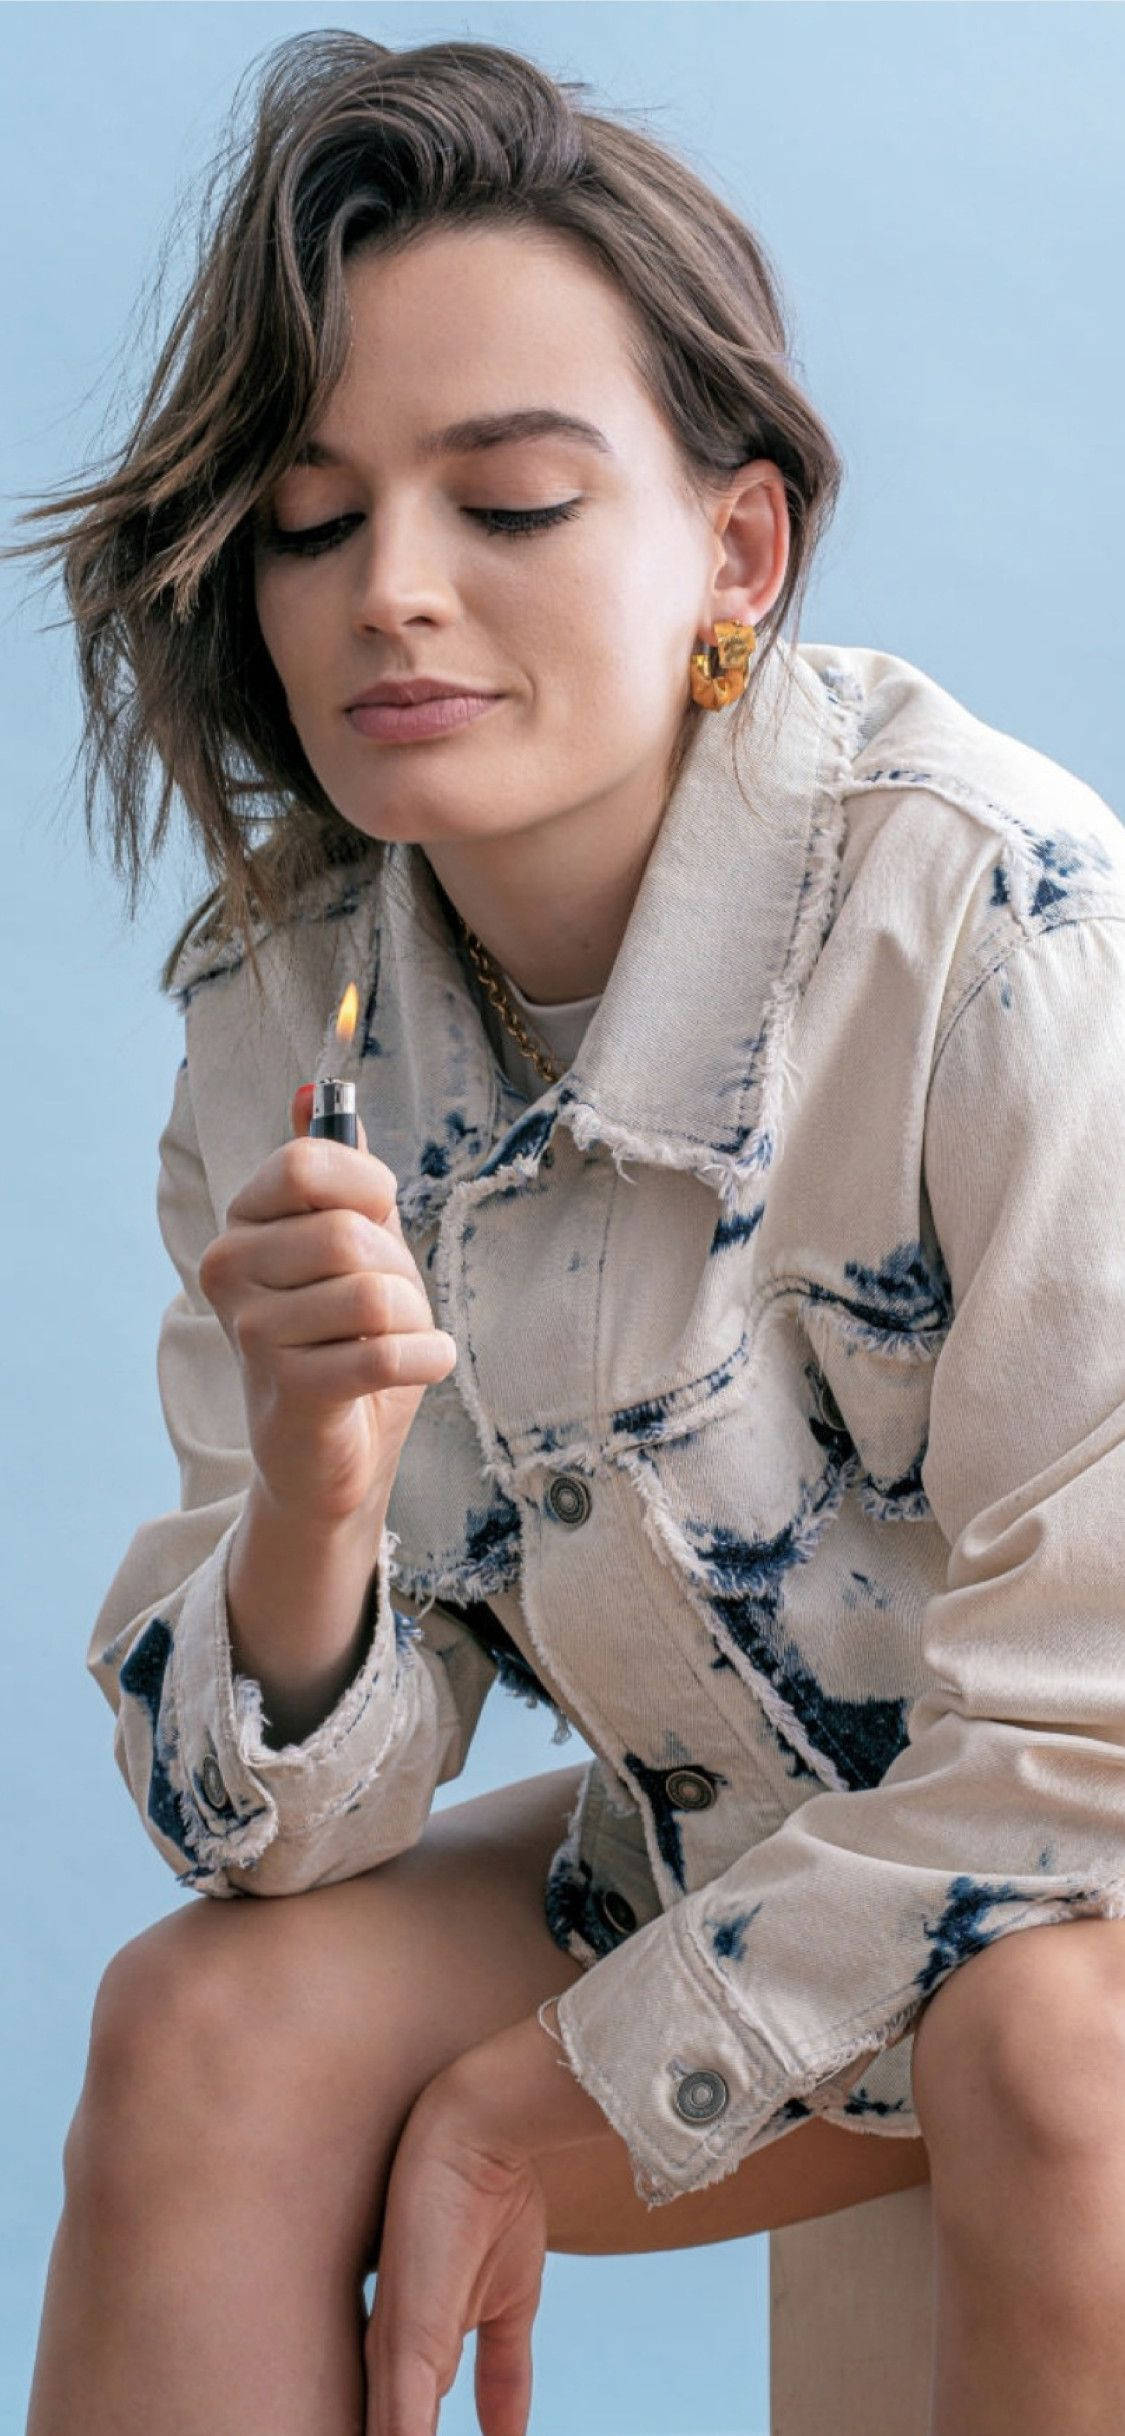 A Fashion Page Featuring The Popular Actress, Emma Mackey, Wearing An Acid Wash Top While Posing With A Lighter